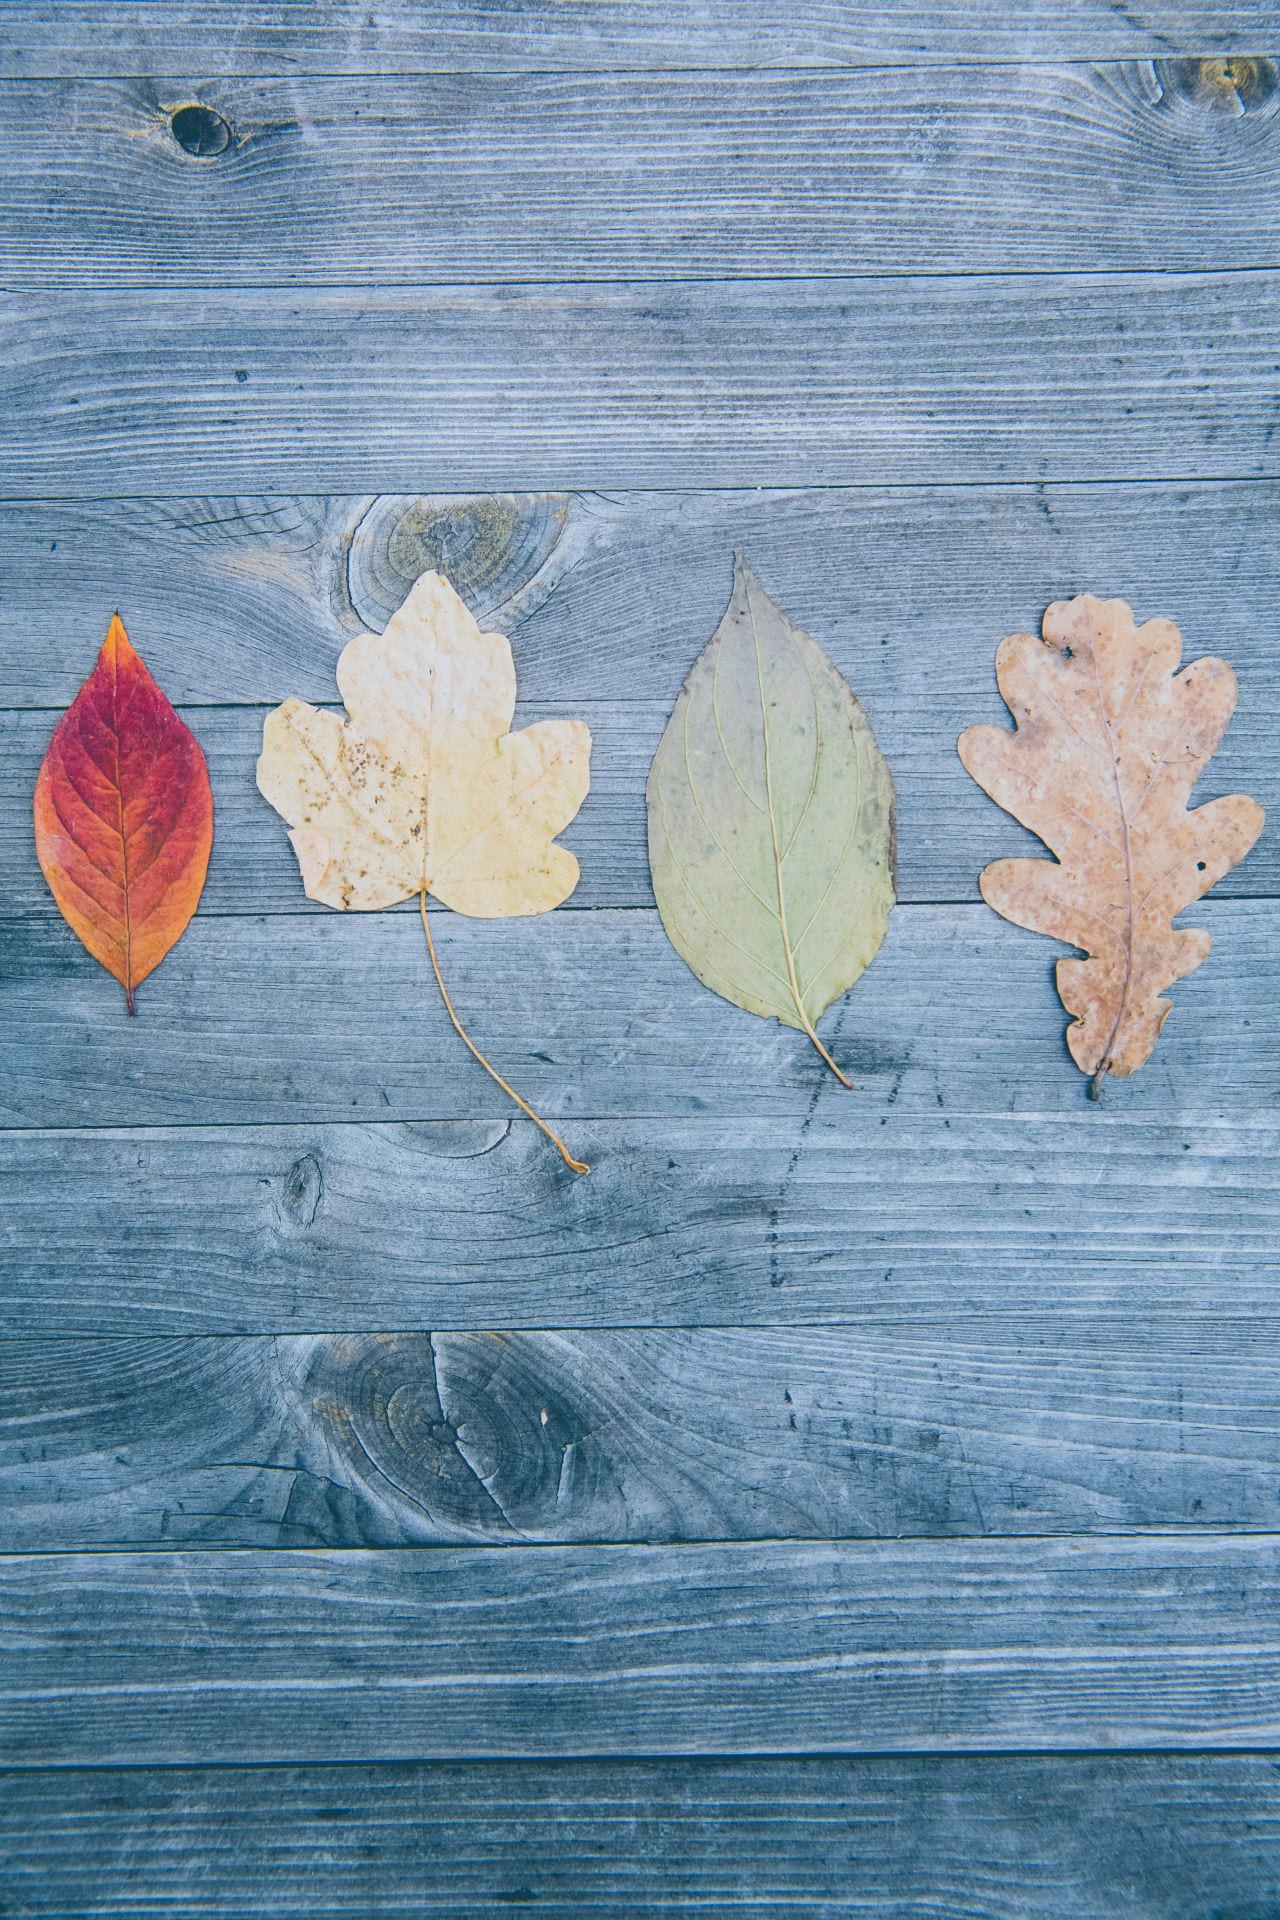 autumn leaves placed on a wooden bench